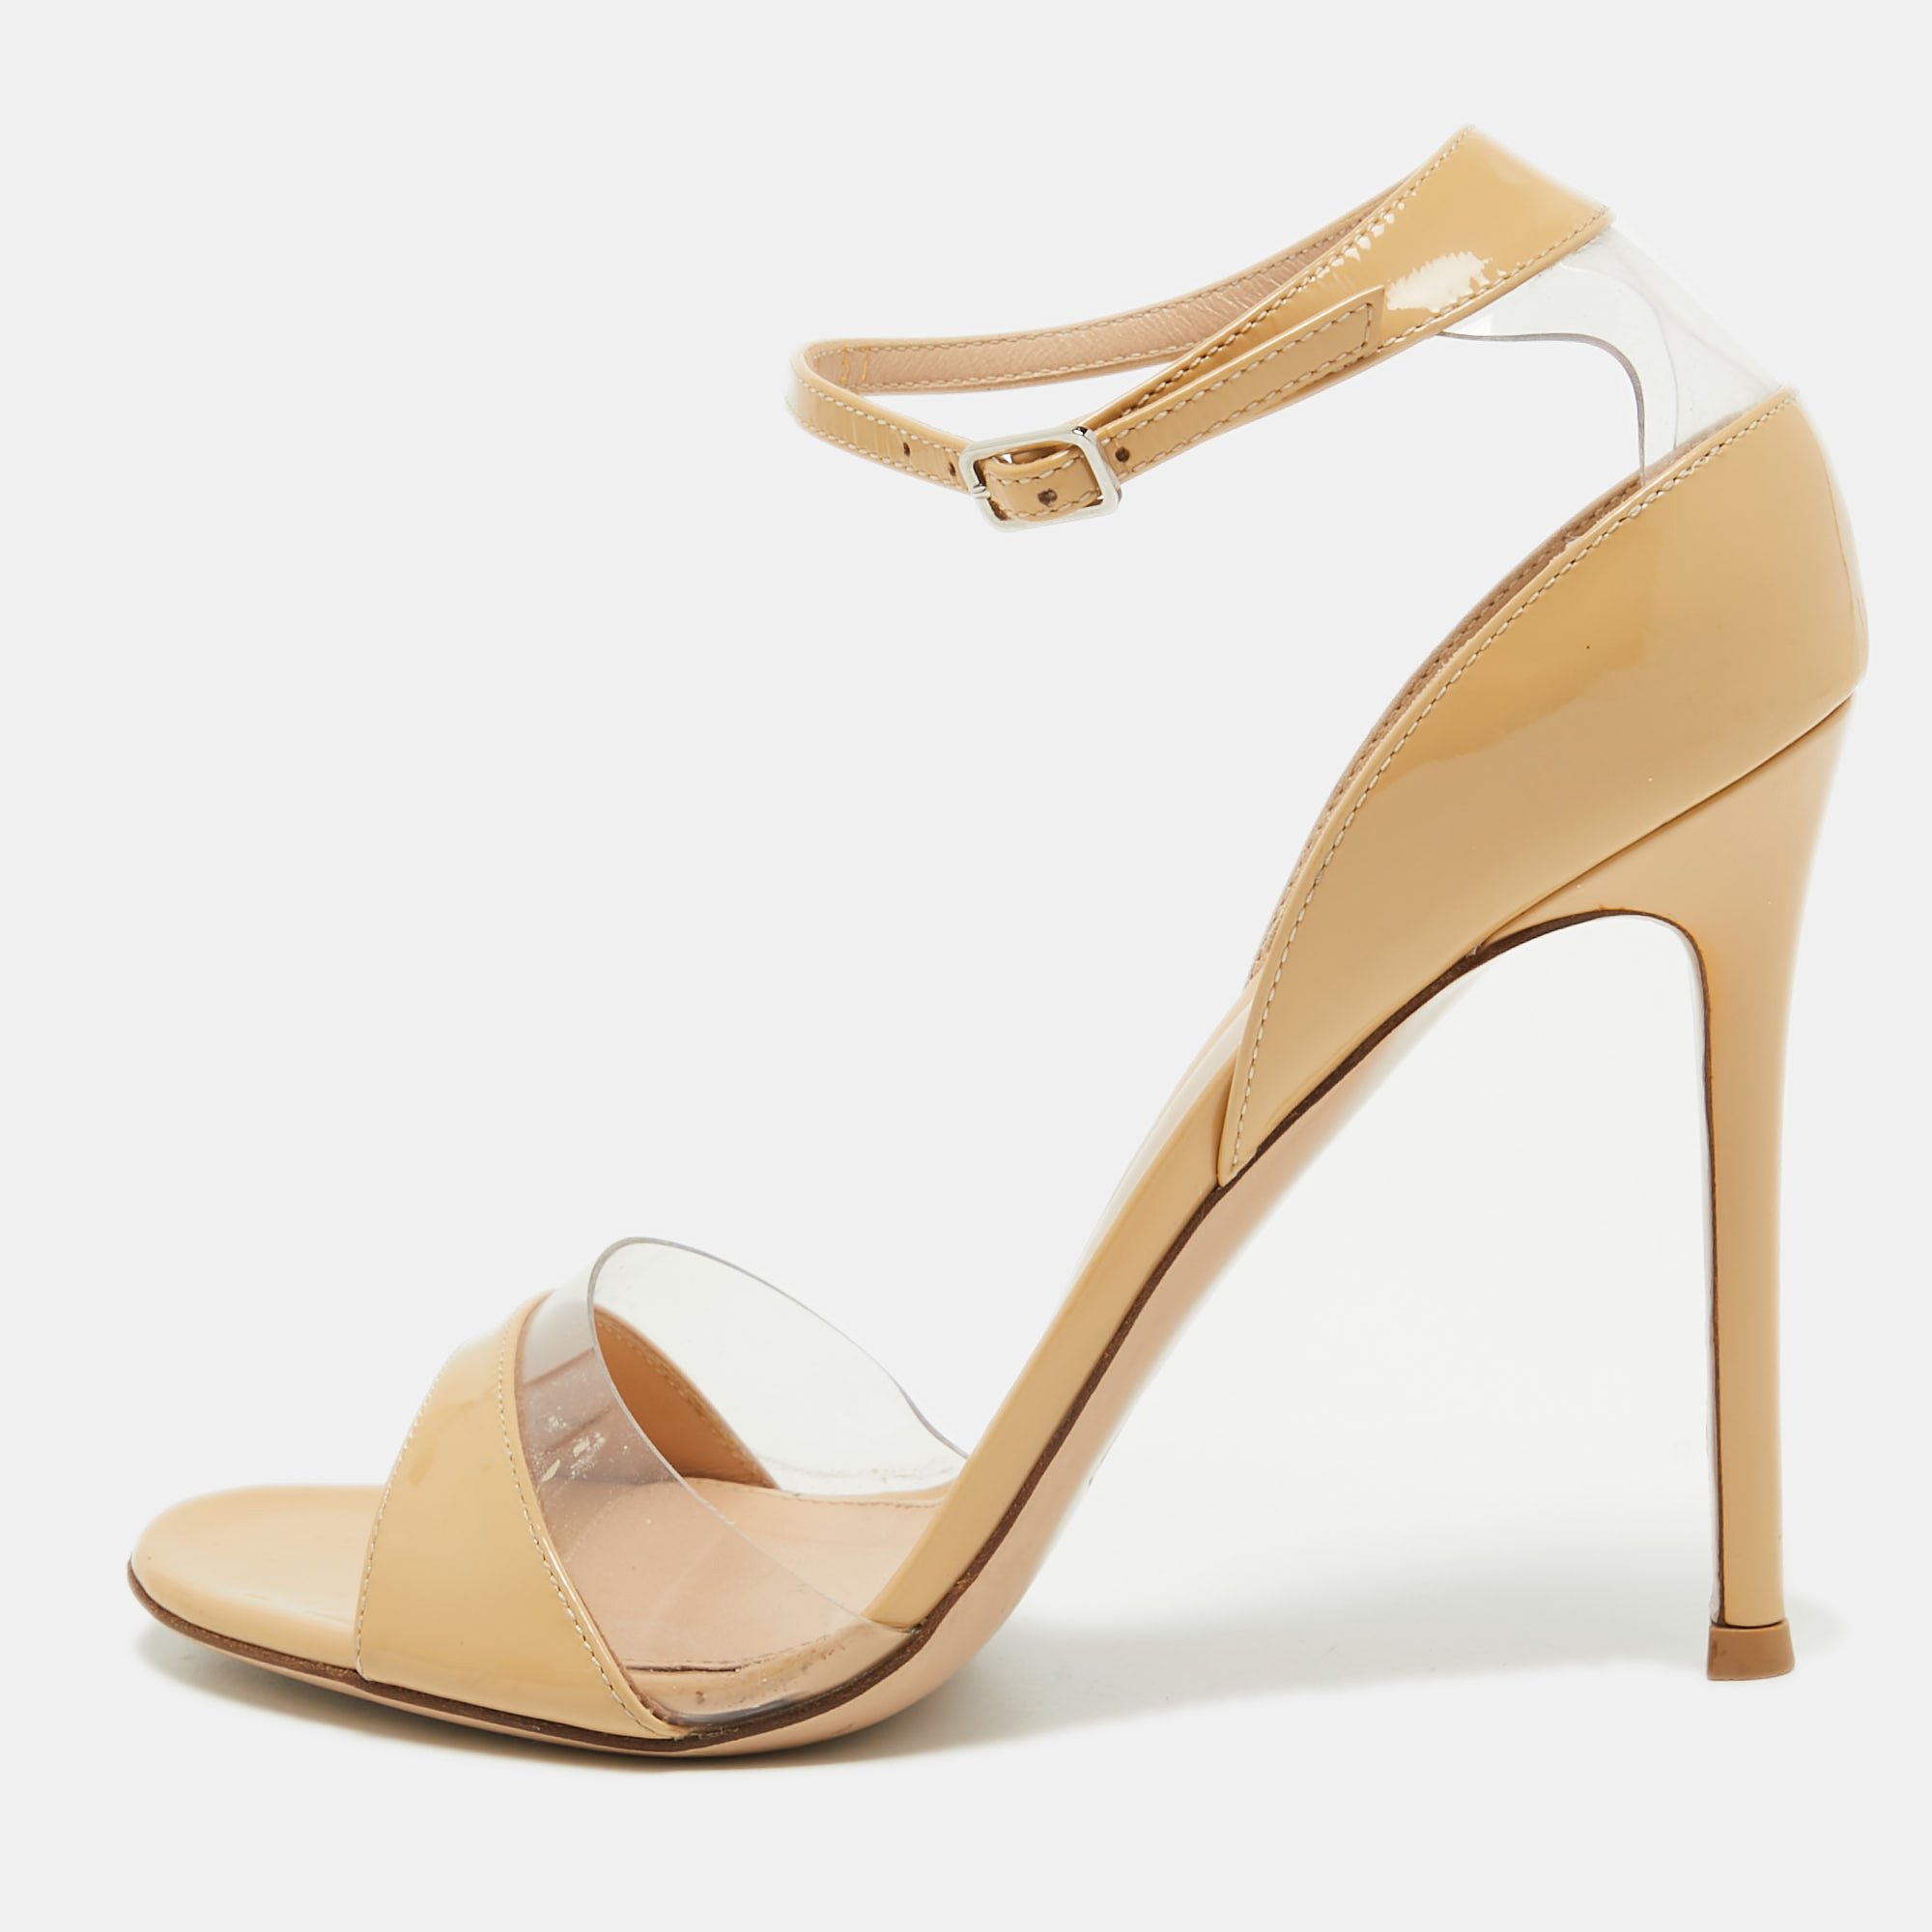 Pre-owned Gianvito Rossi Beige Patent Leather And Pvc Ankle Strap Sandals Size 37